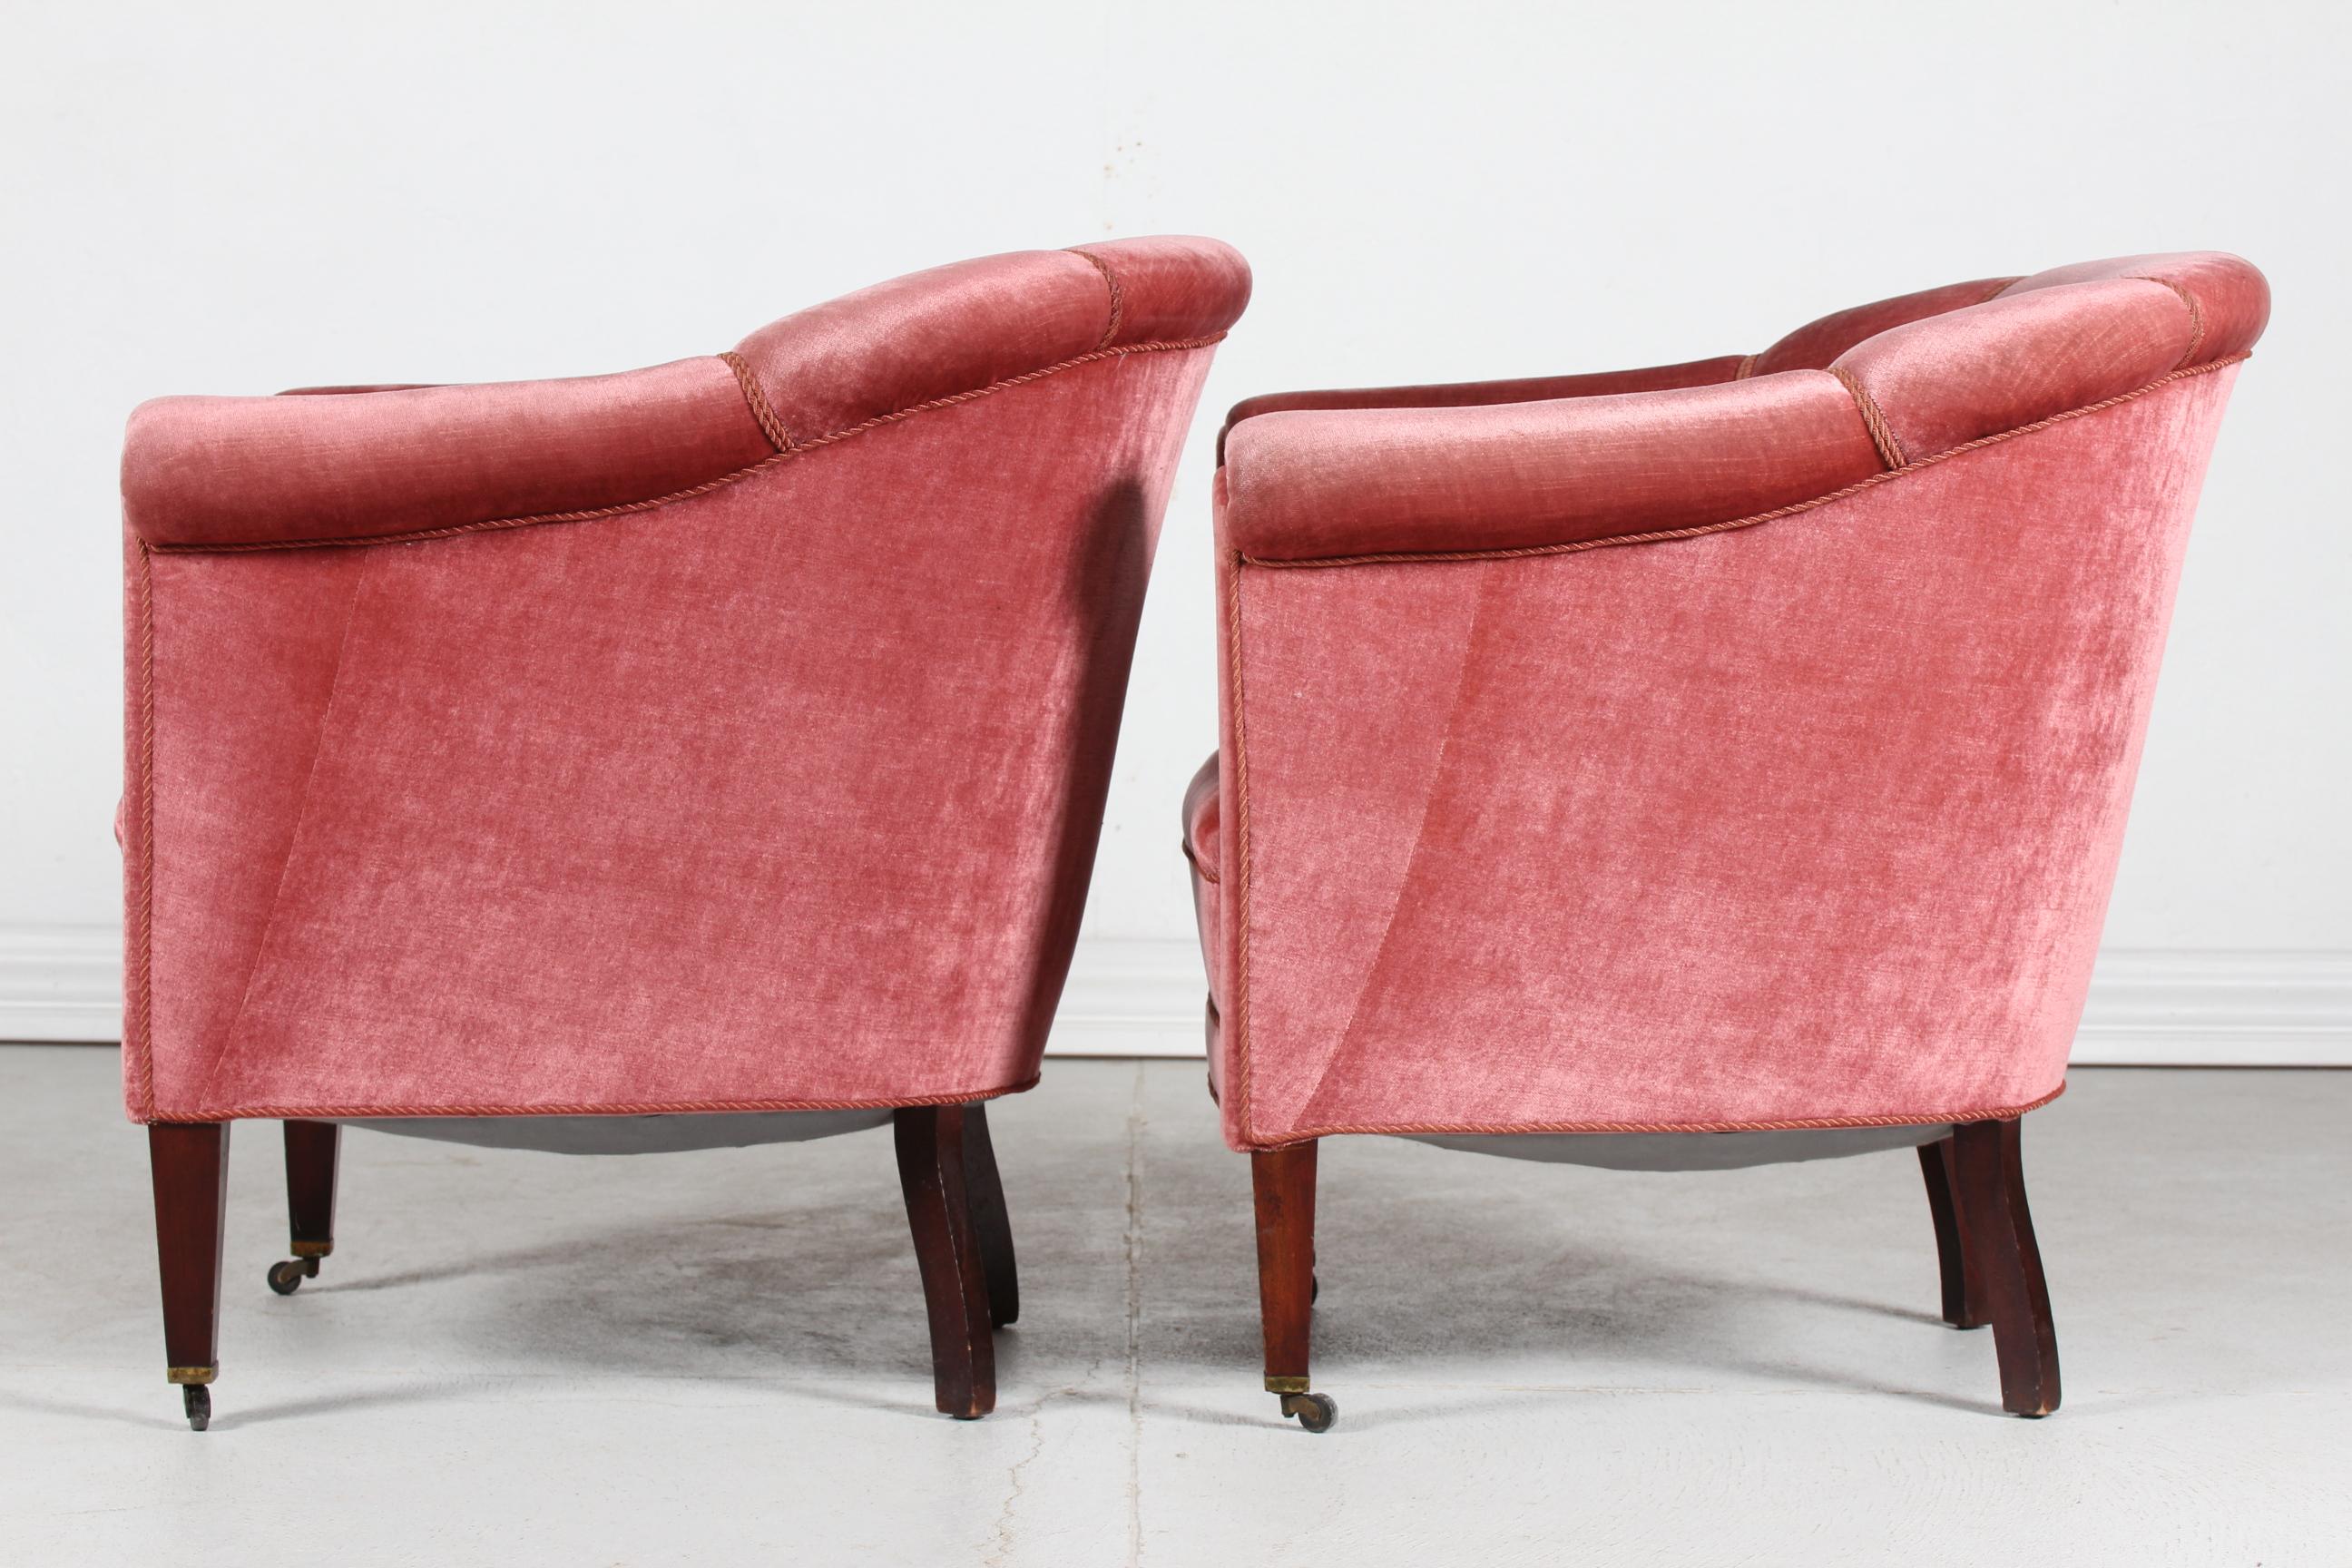 Pair of Old Danish Chesterfield Club Lounge Chairs Upholstered Pink Velvet 1920s 3